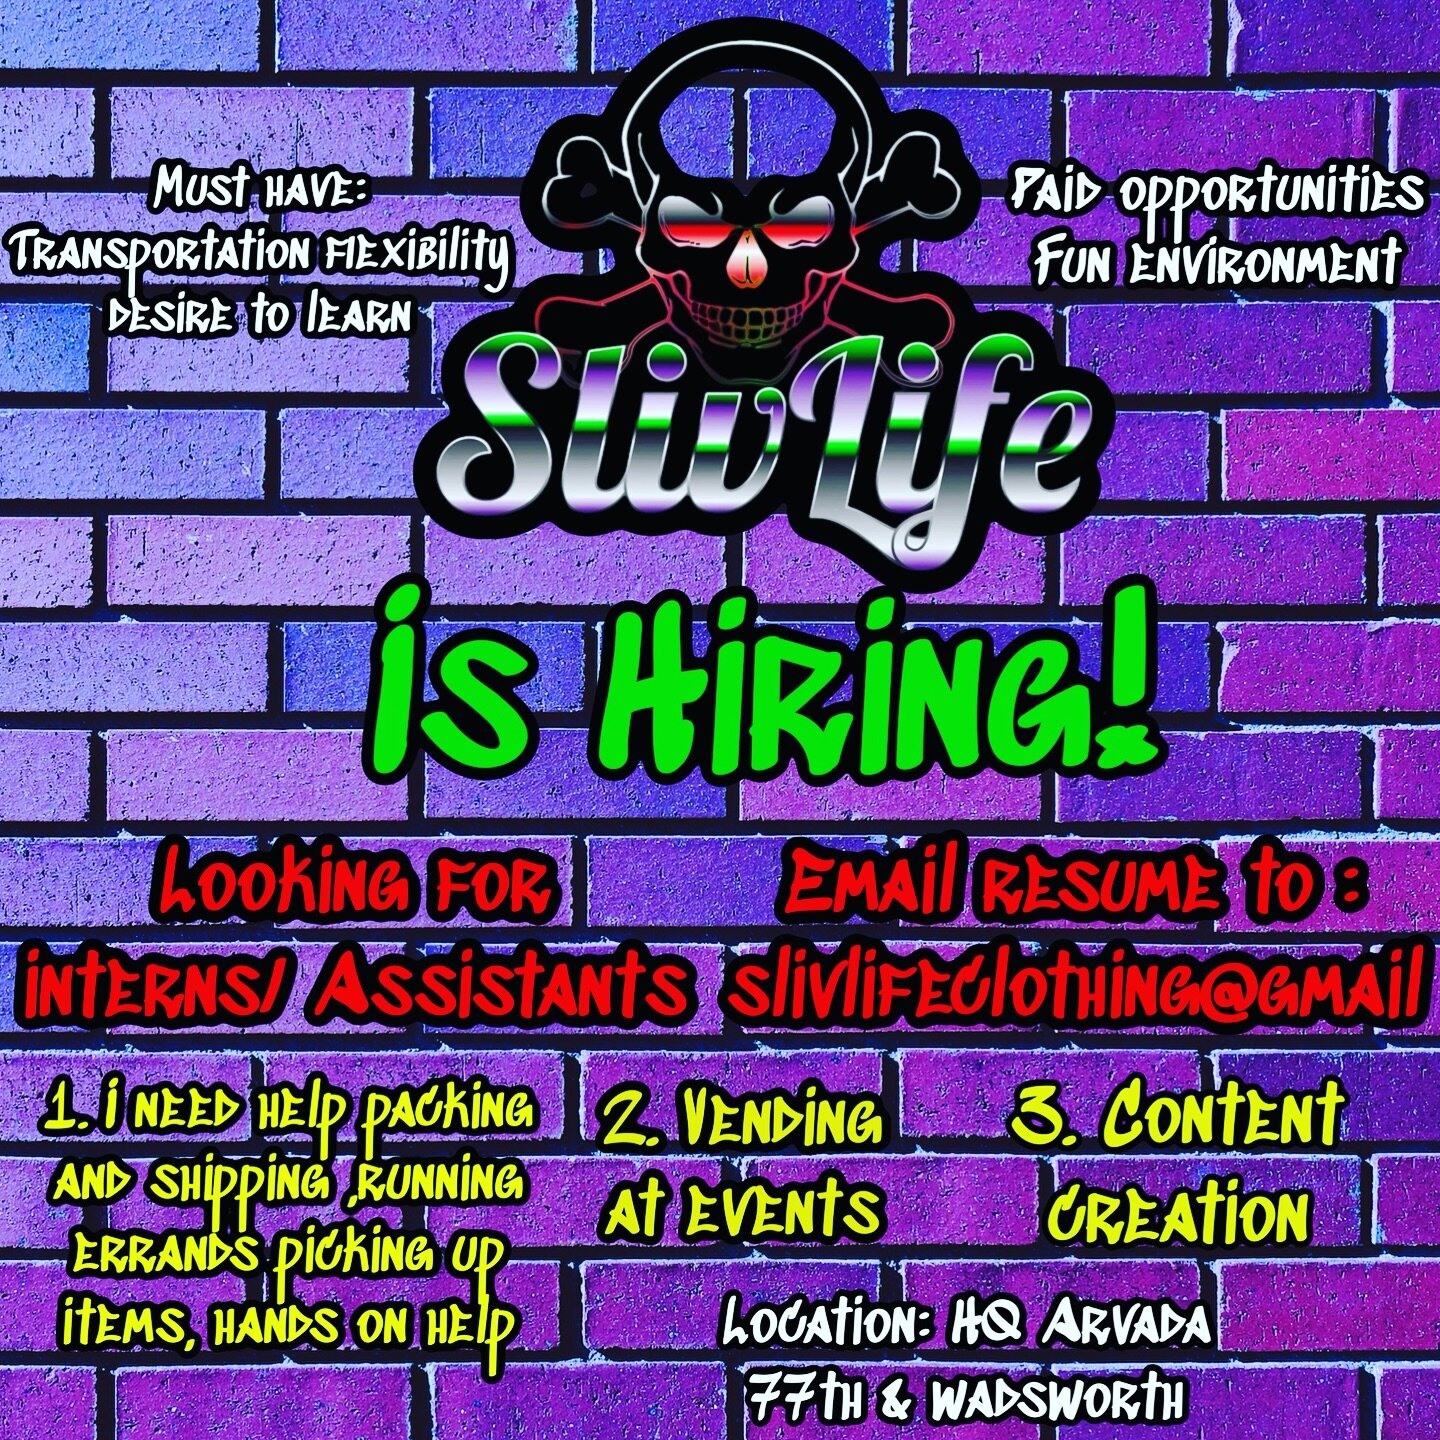 I&rsquo;m hiring again and growing the Sliv team in 2024! I&rsquo;m looking for personal interns / assistants with paid opportunities as you learn! 

The more you learn the more you can earn! At first it is a trail period see if we work together well